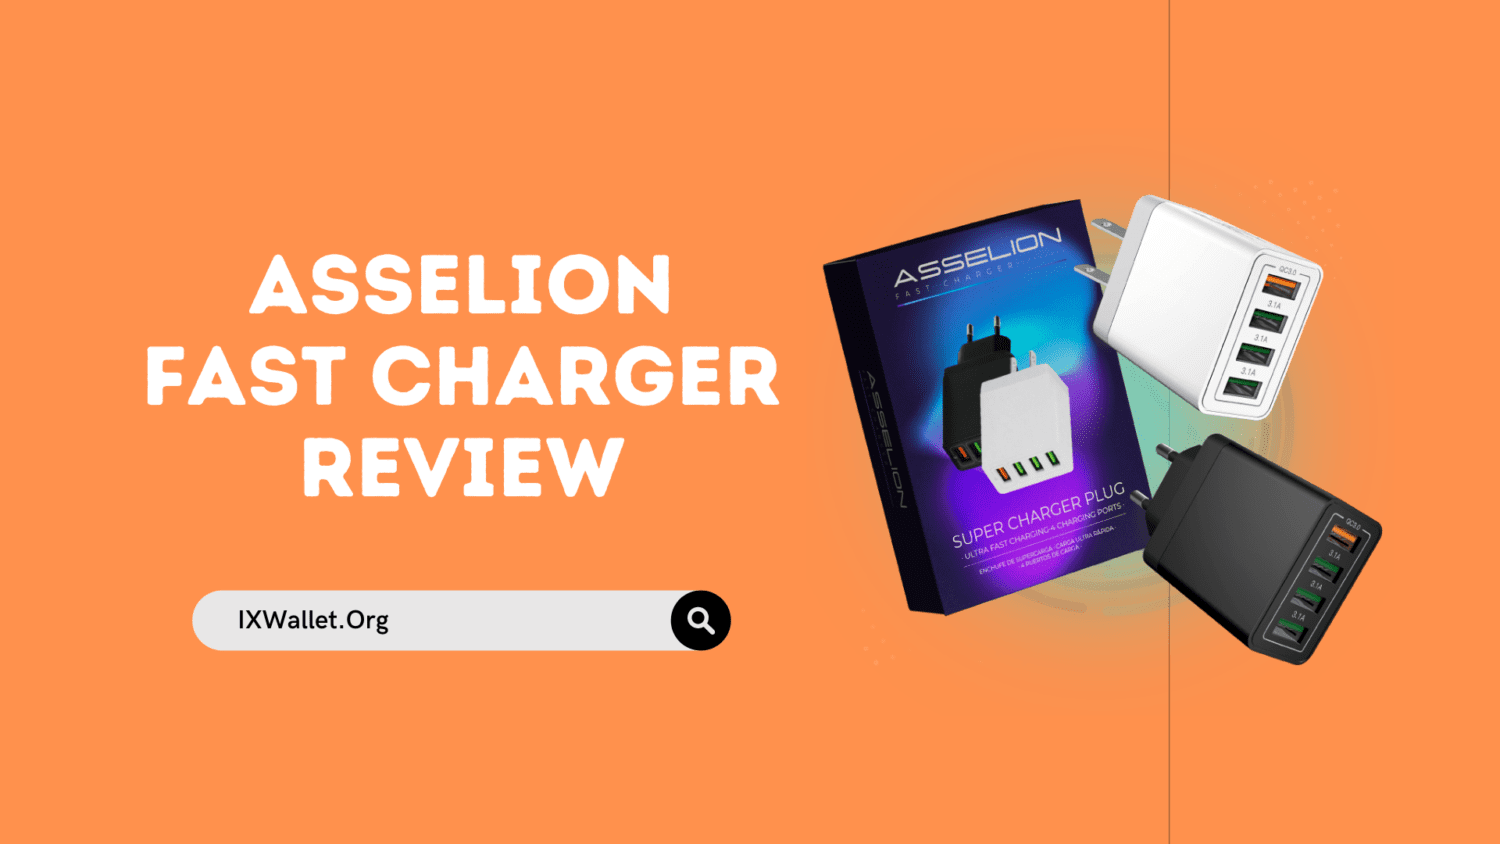 Asselion Fast Charger Review: Does It Really Work?